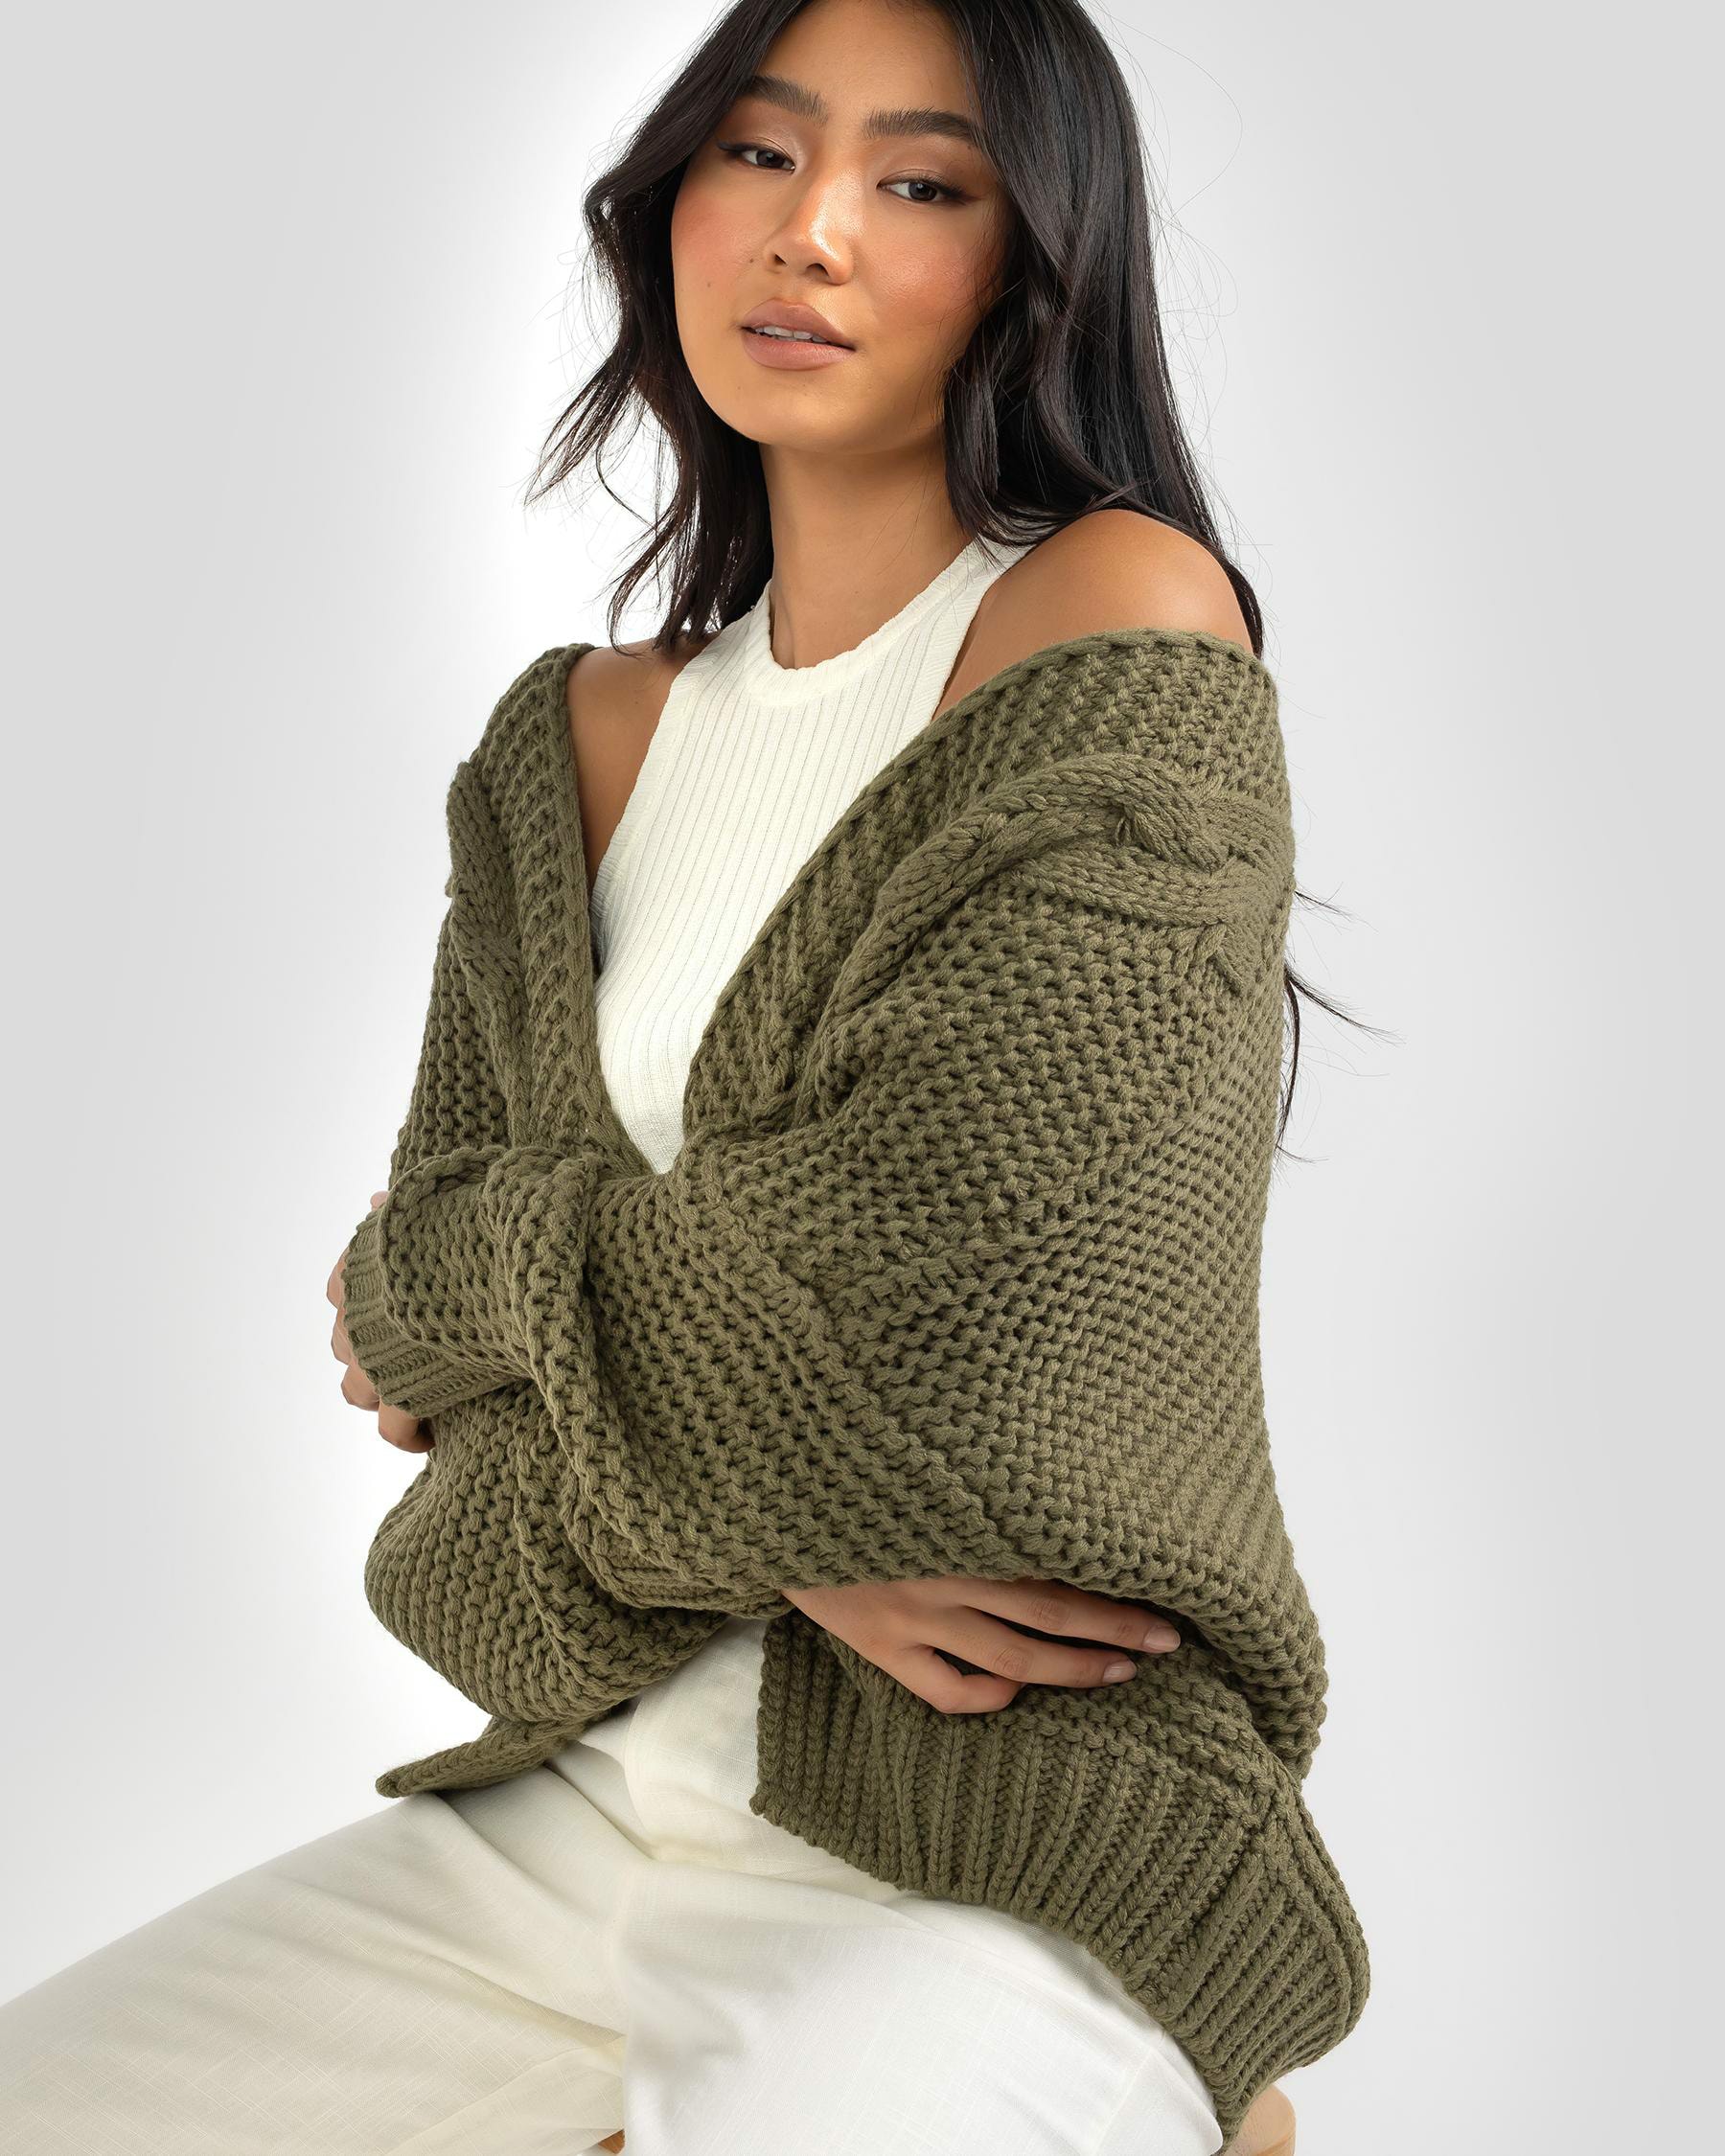 CITY BEACH - Ava And Ever Drive-In Knit $49.99